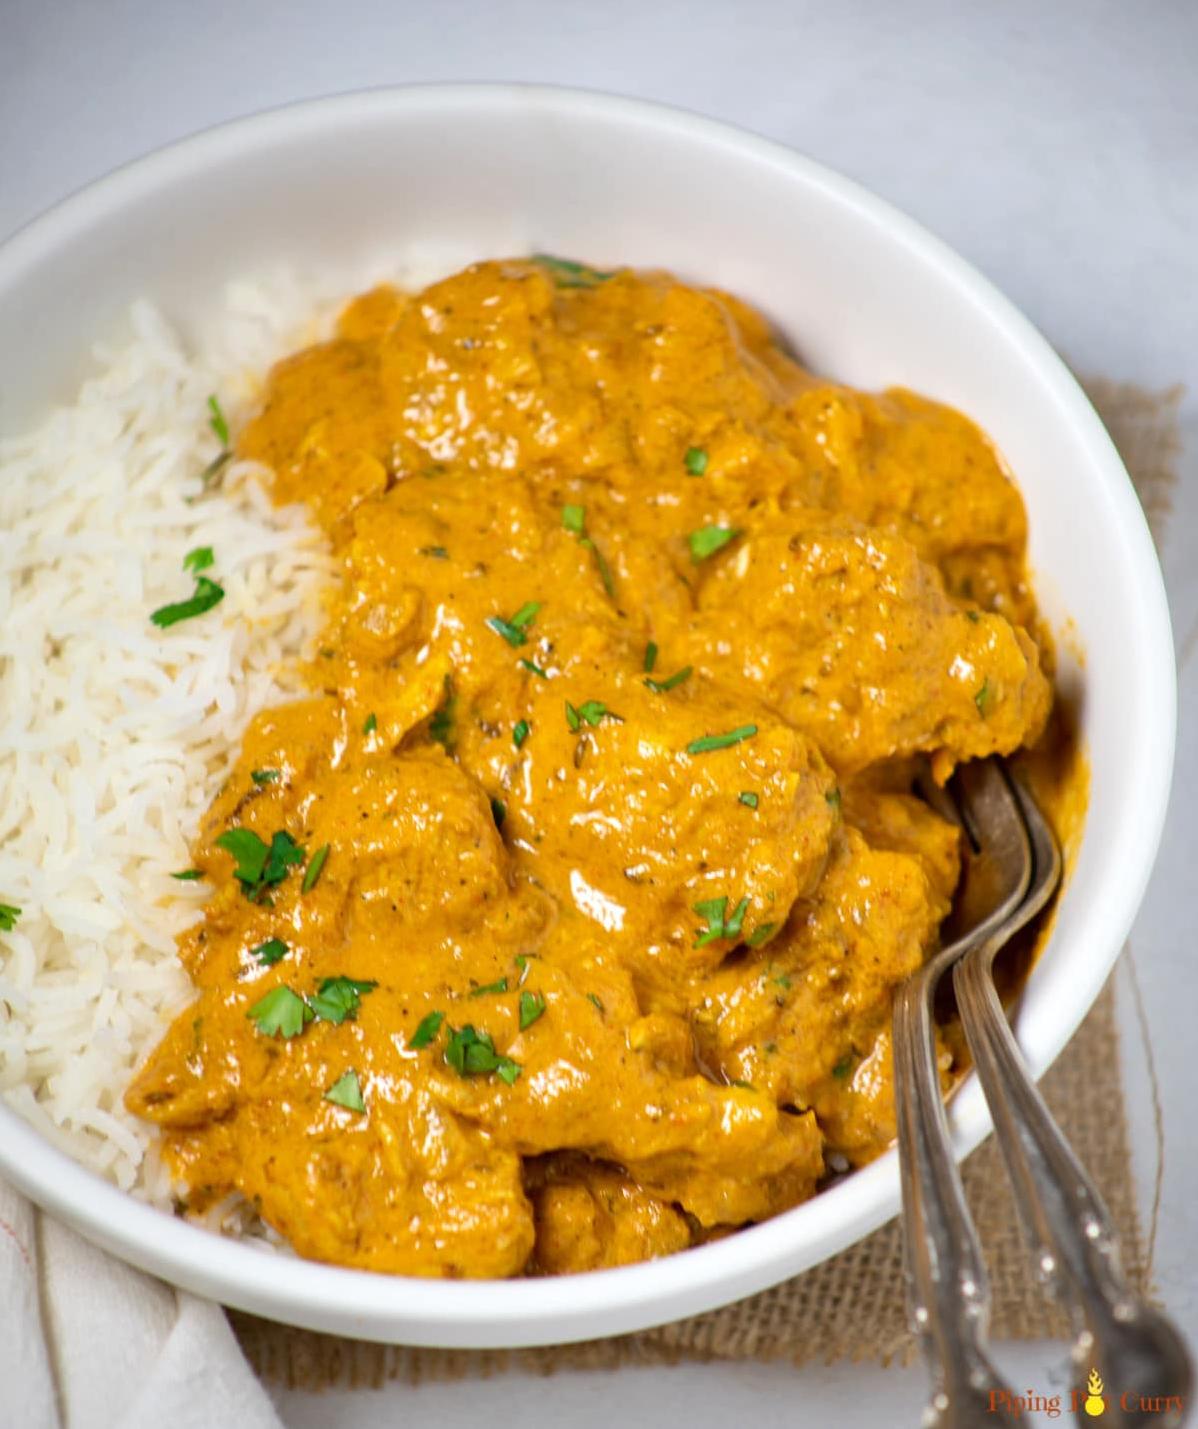  One pot wonders- Instant Pot Curry Chicken is an easy and tasty weeknight dinner option.